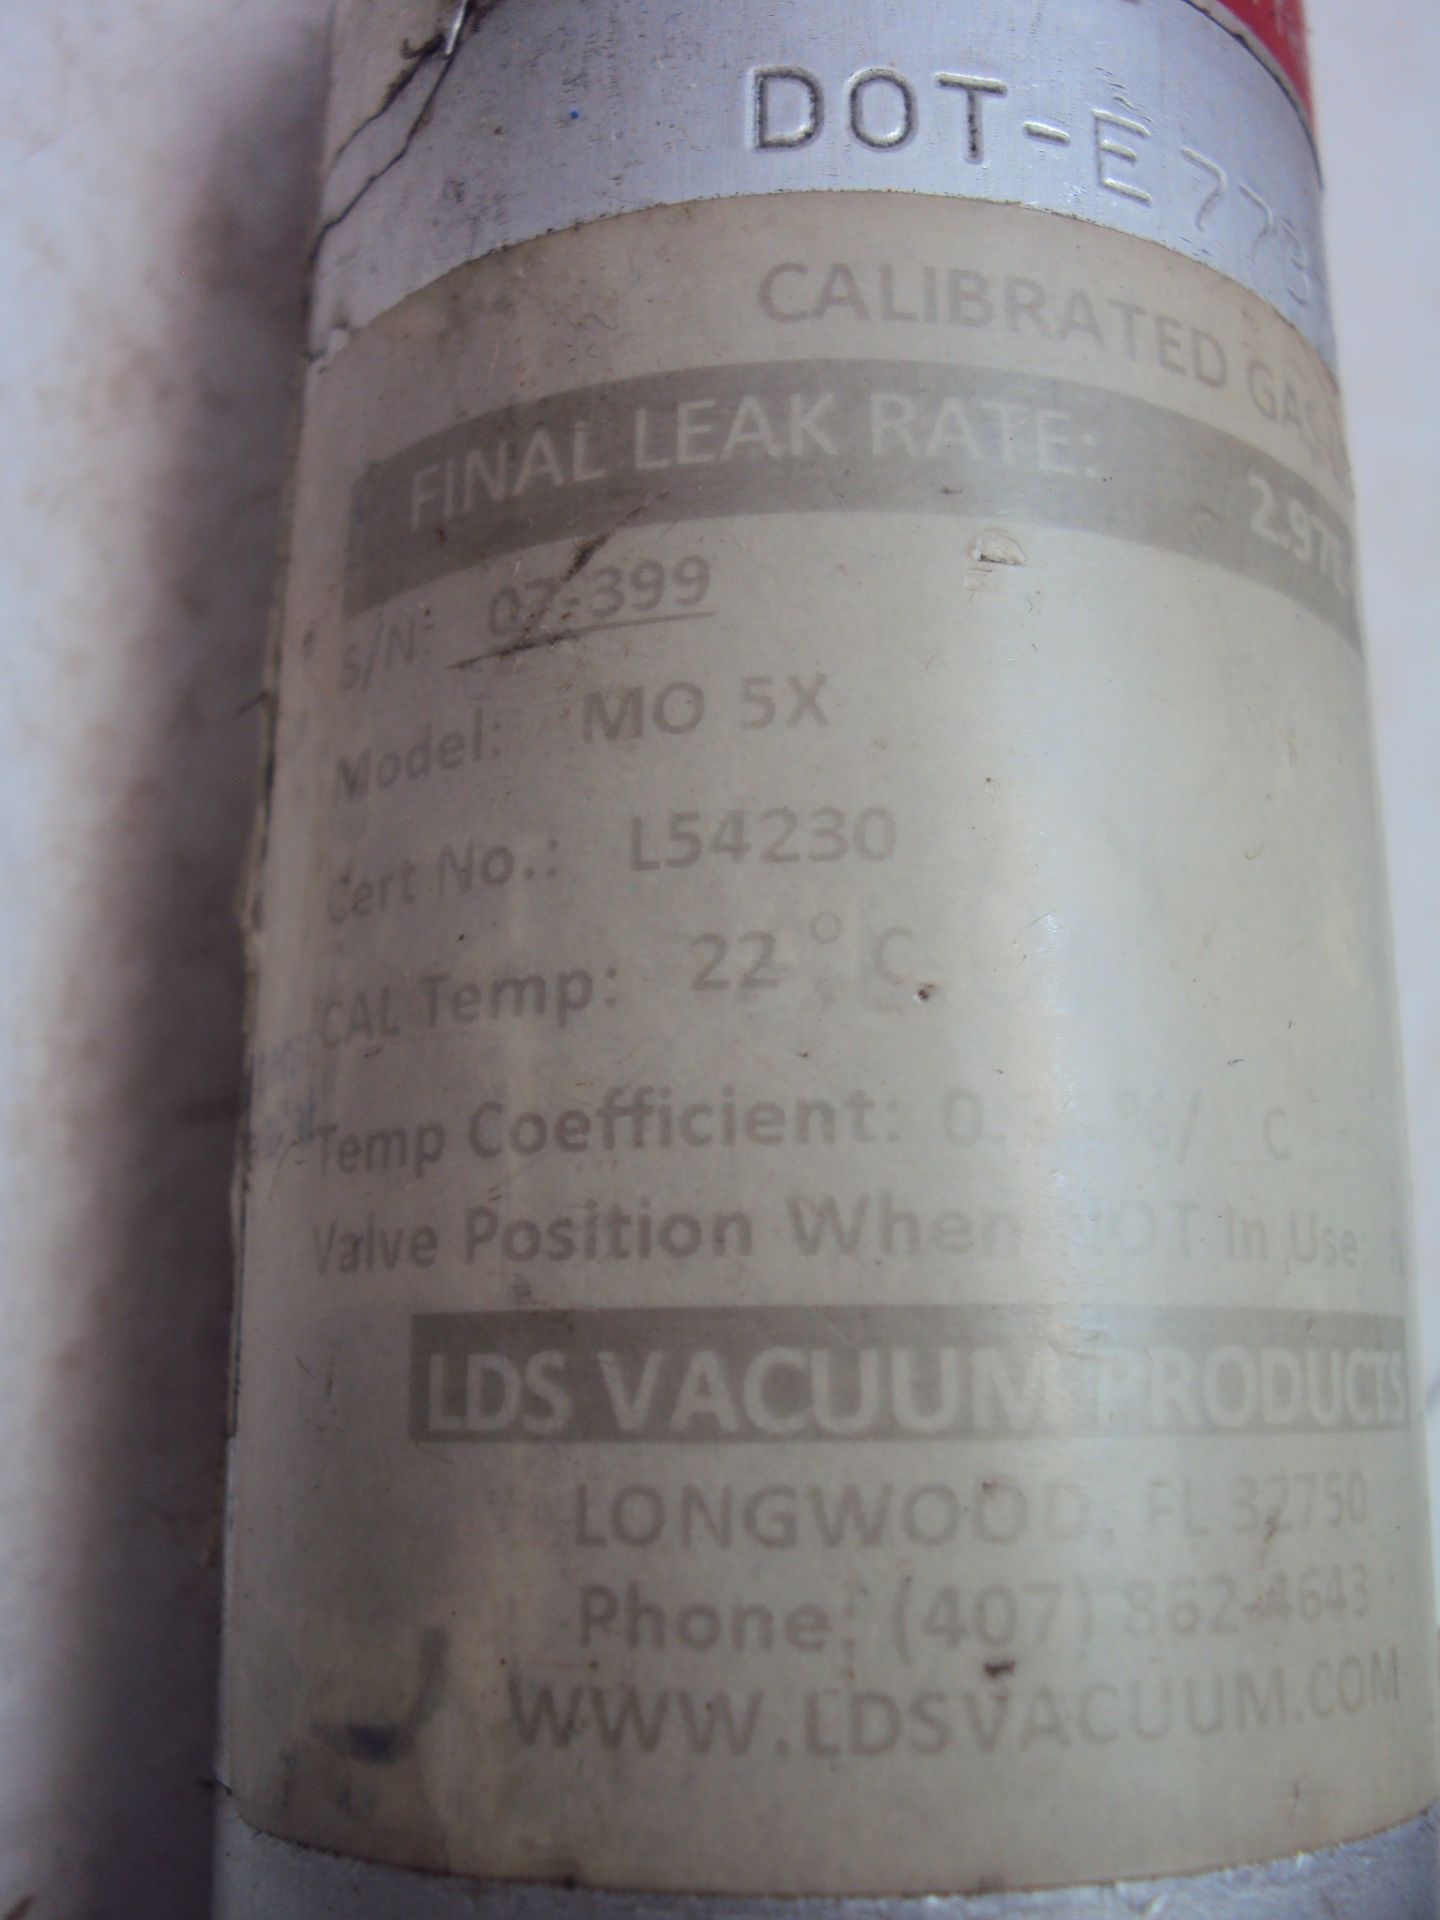 Calibrated Gas Leak Standards and Cylinders - Bild 7 aus 10